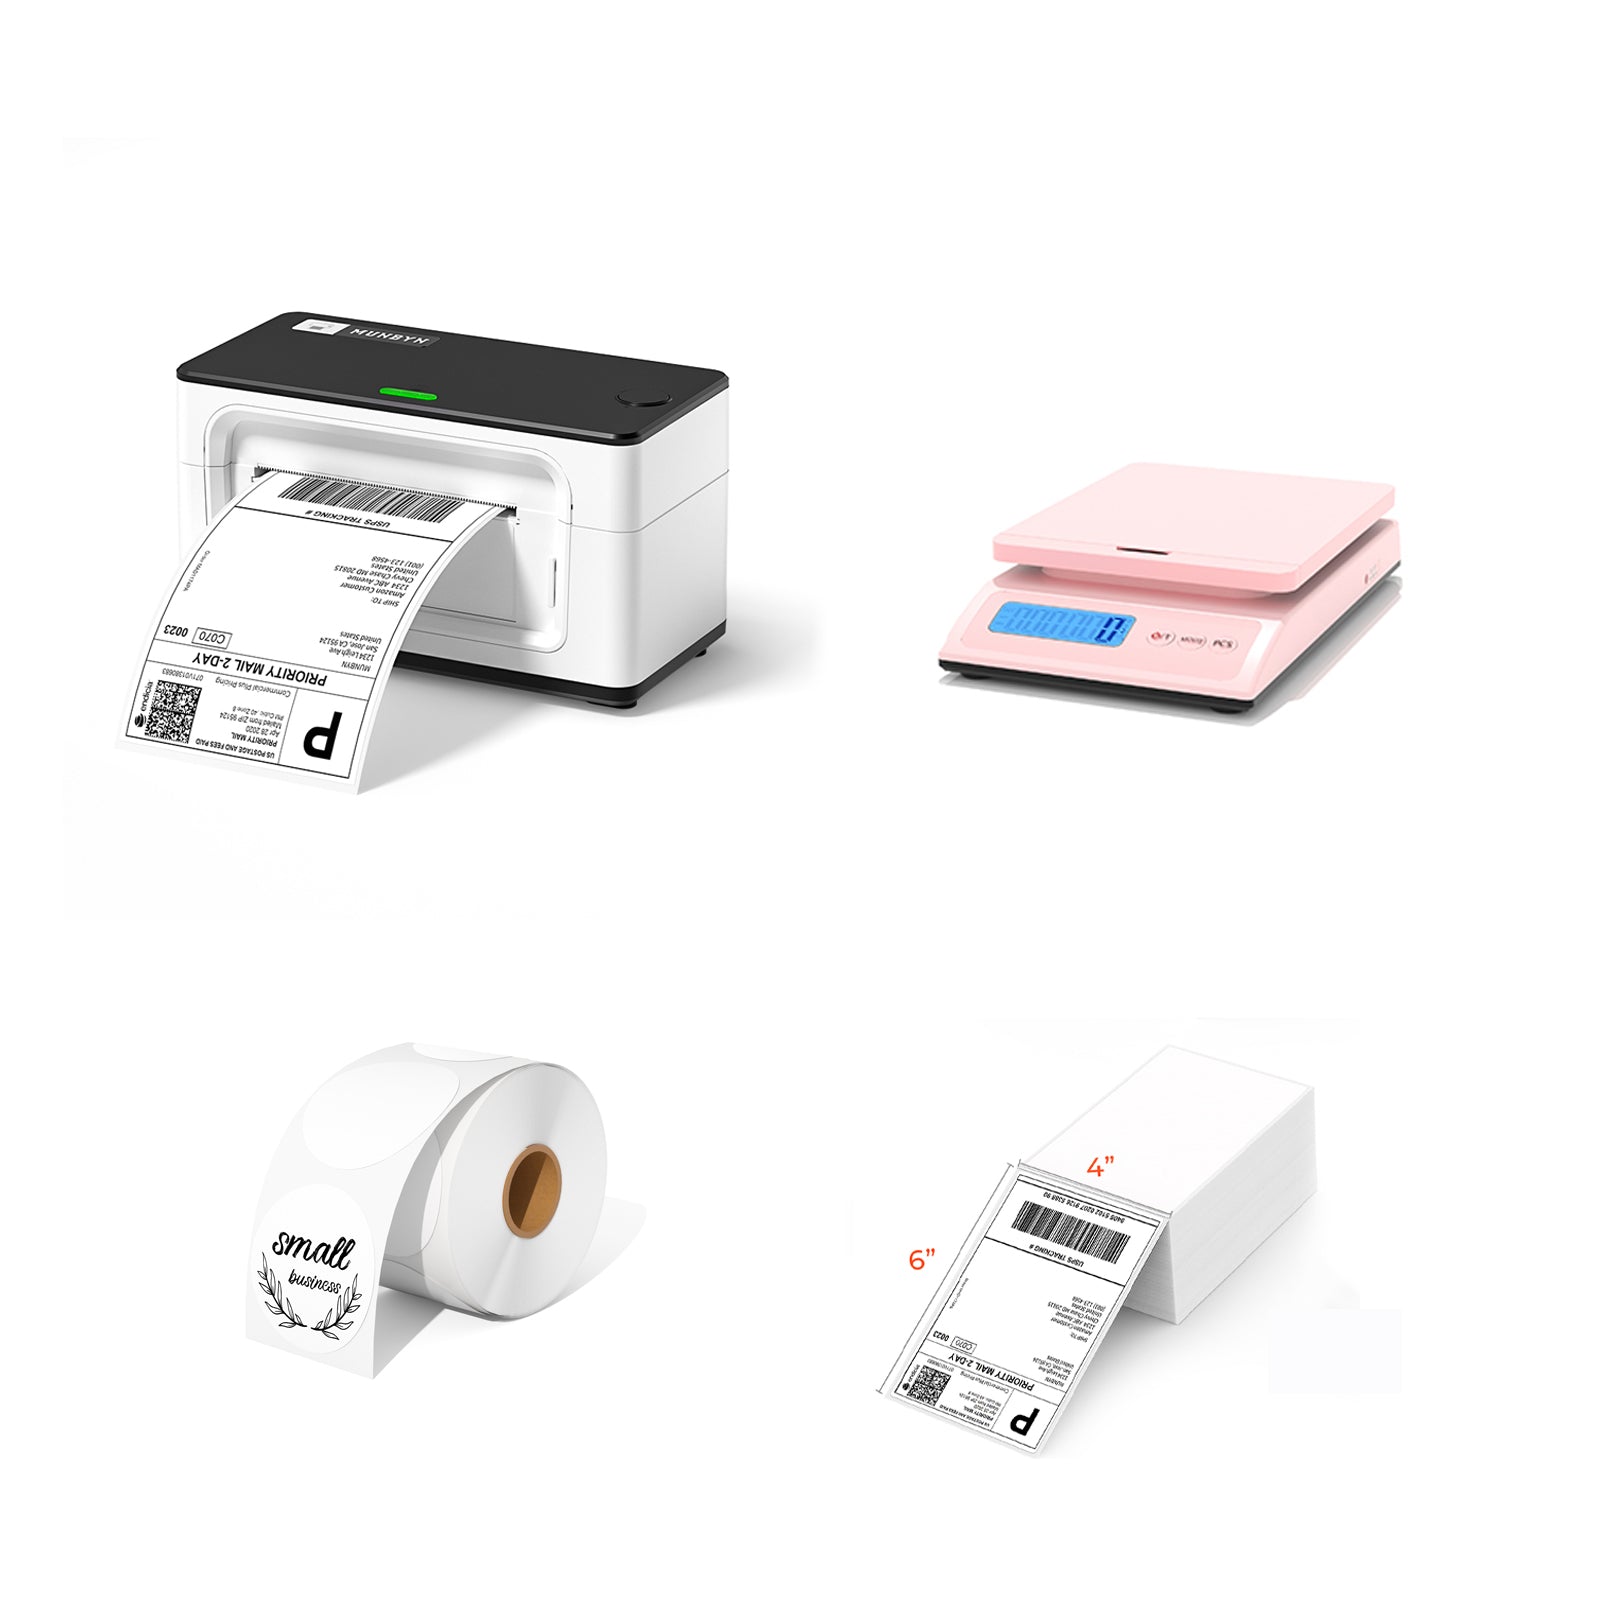 The MUNBYN P941 Pro commercial printer kit includes a thermal printer, a roll of blank circle labels, a shipping scale and a stack of shipping labels.